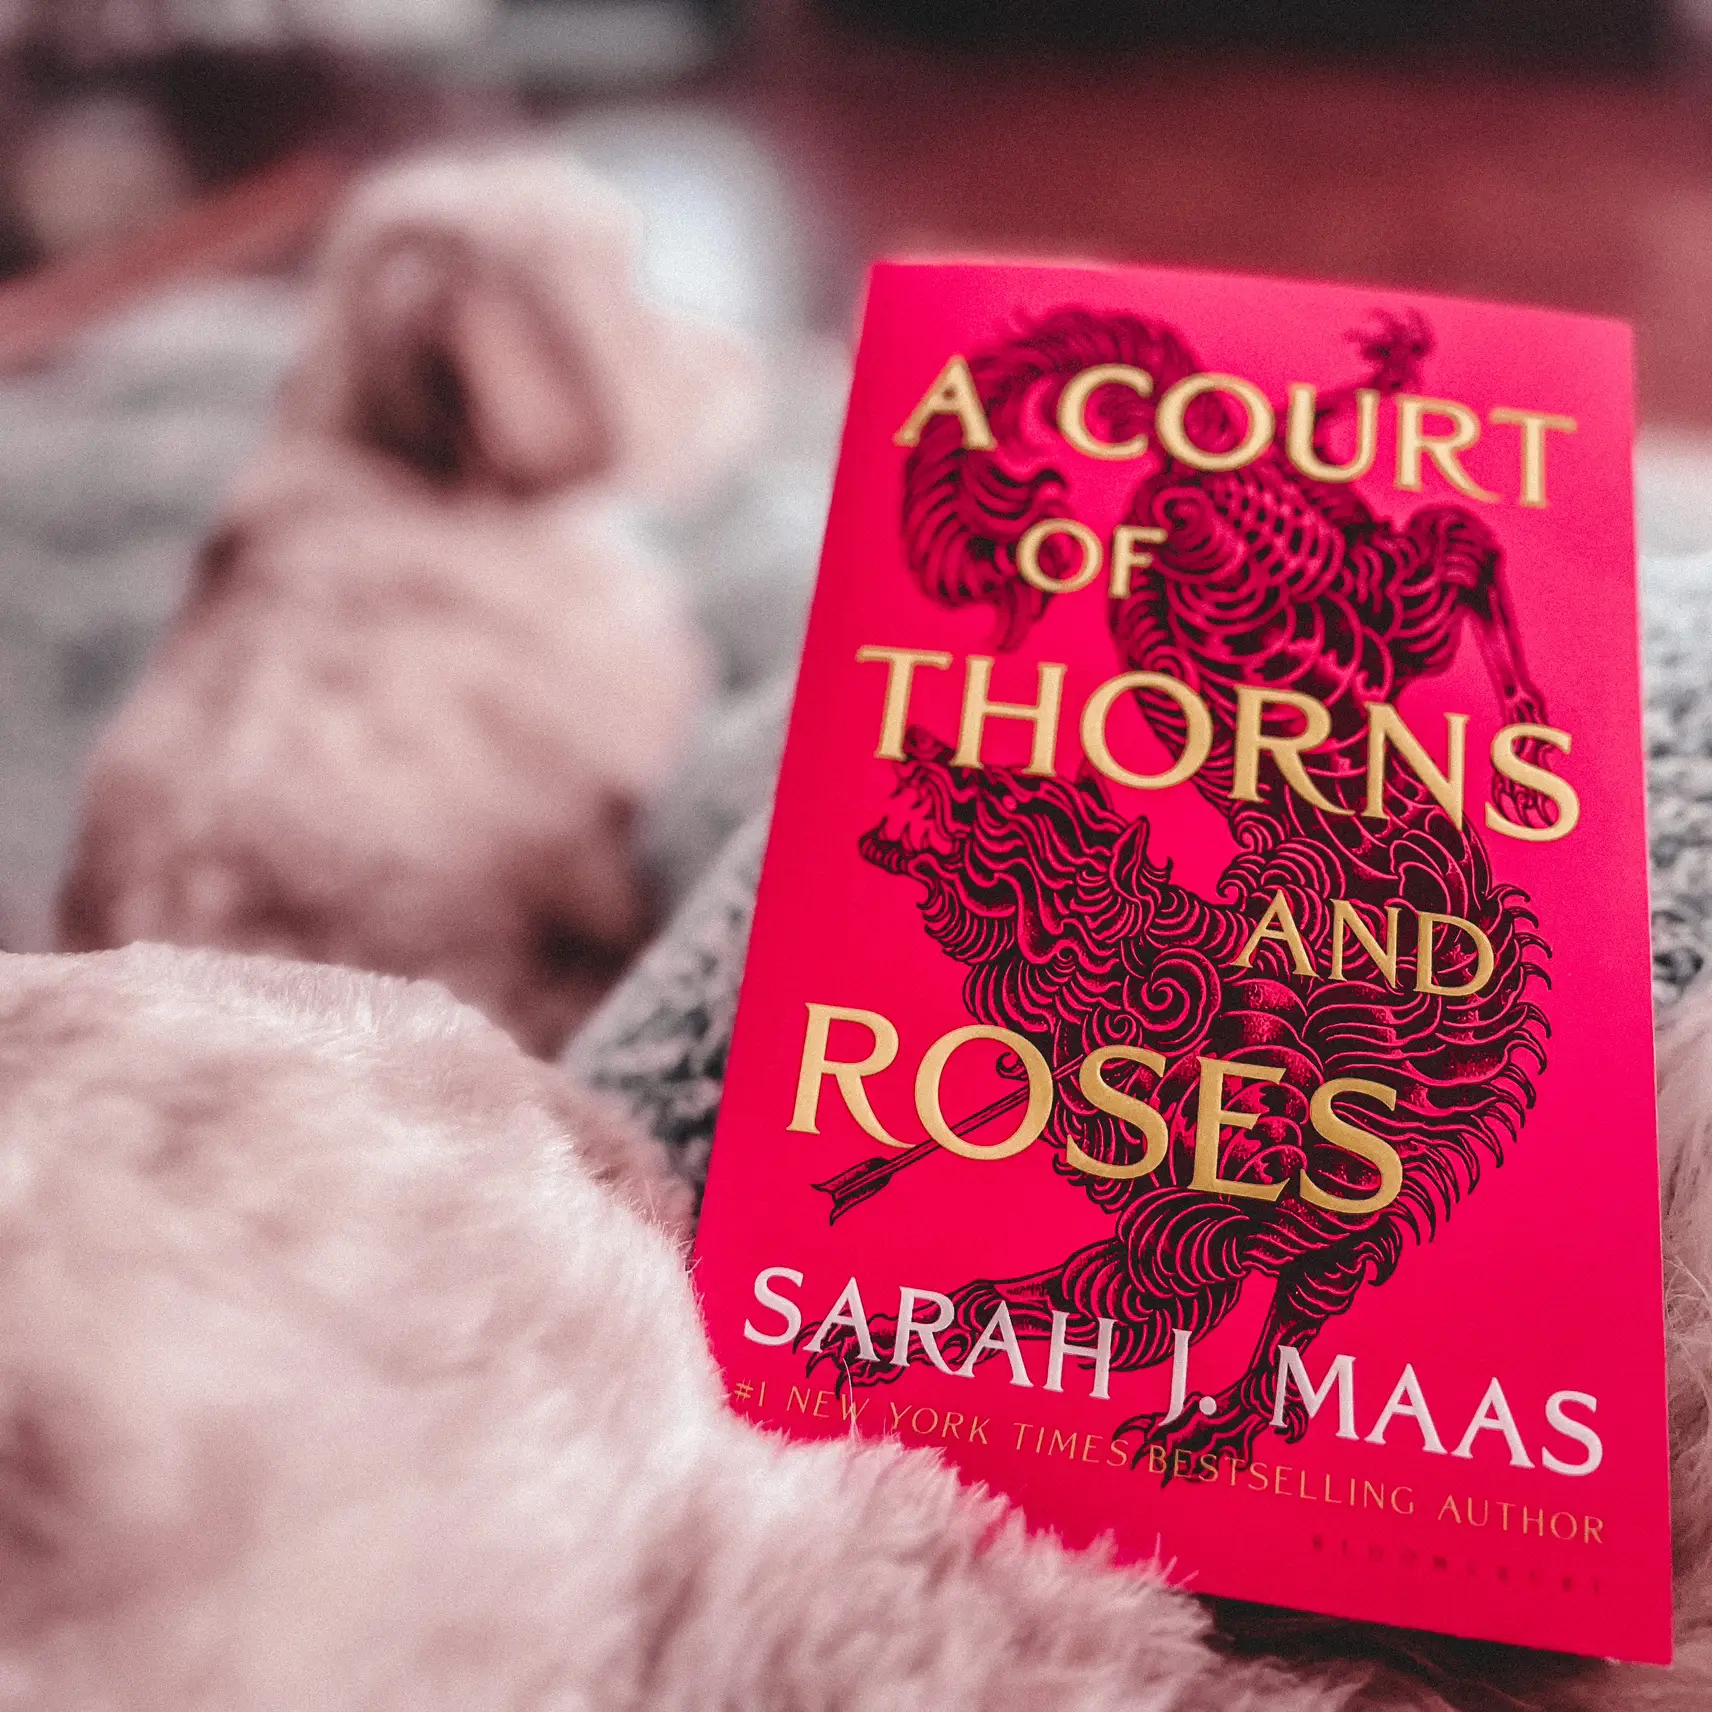 Books To Read After the 'A Court of Thorns and Roses' Series – SheKnows